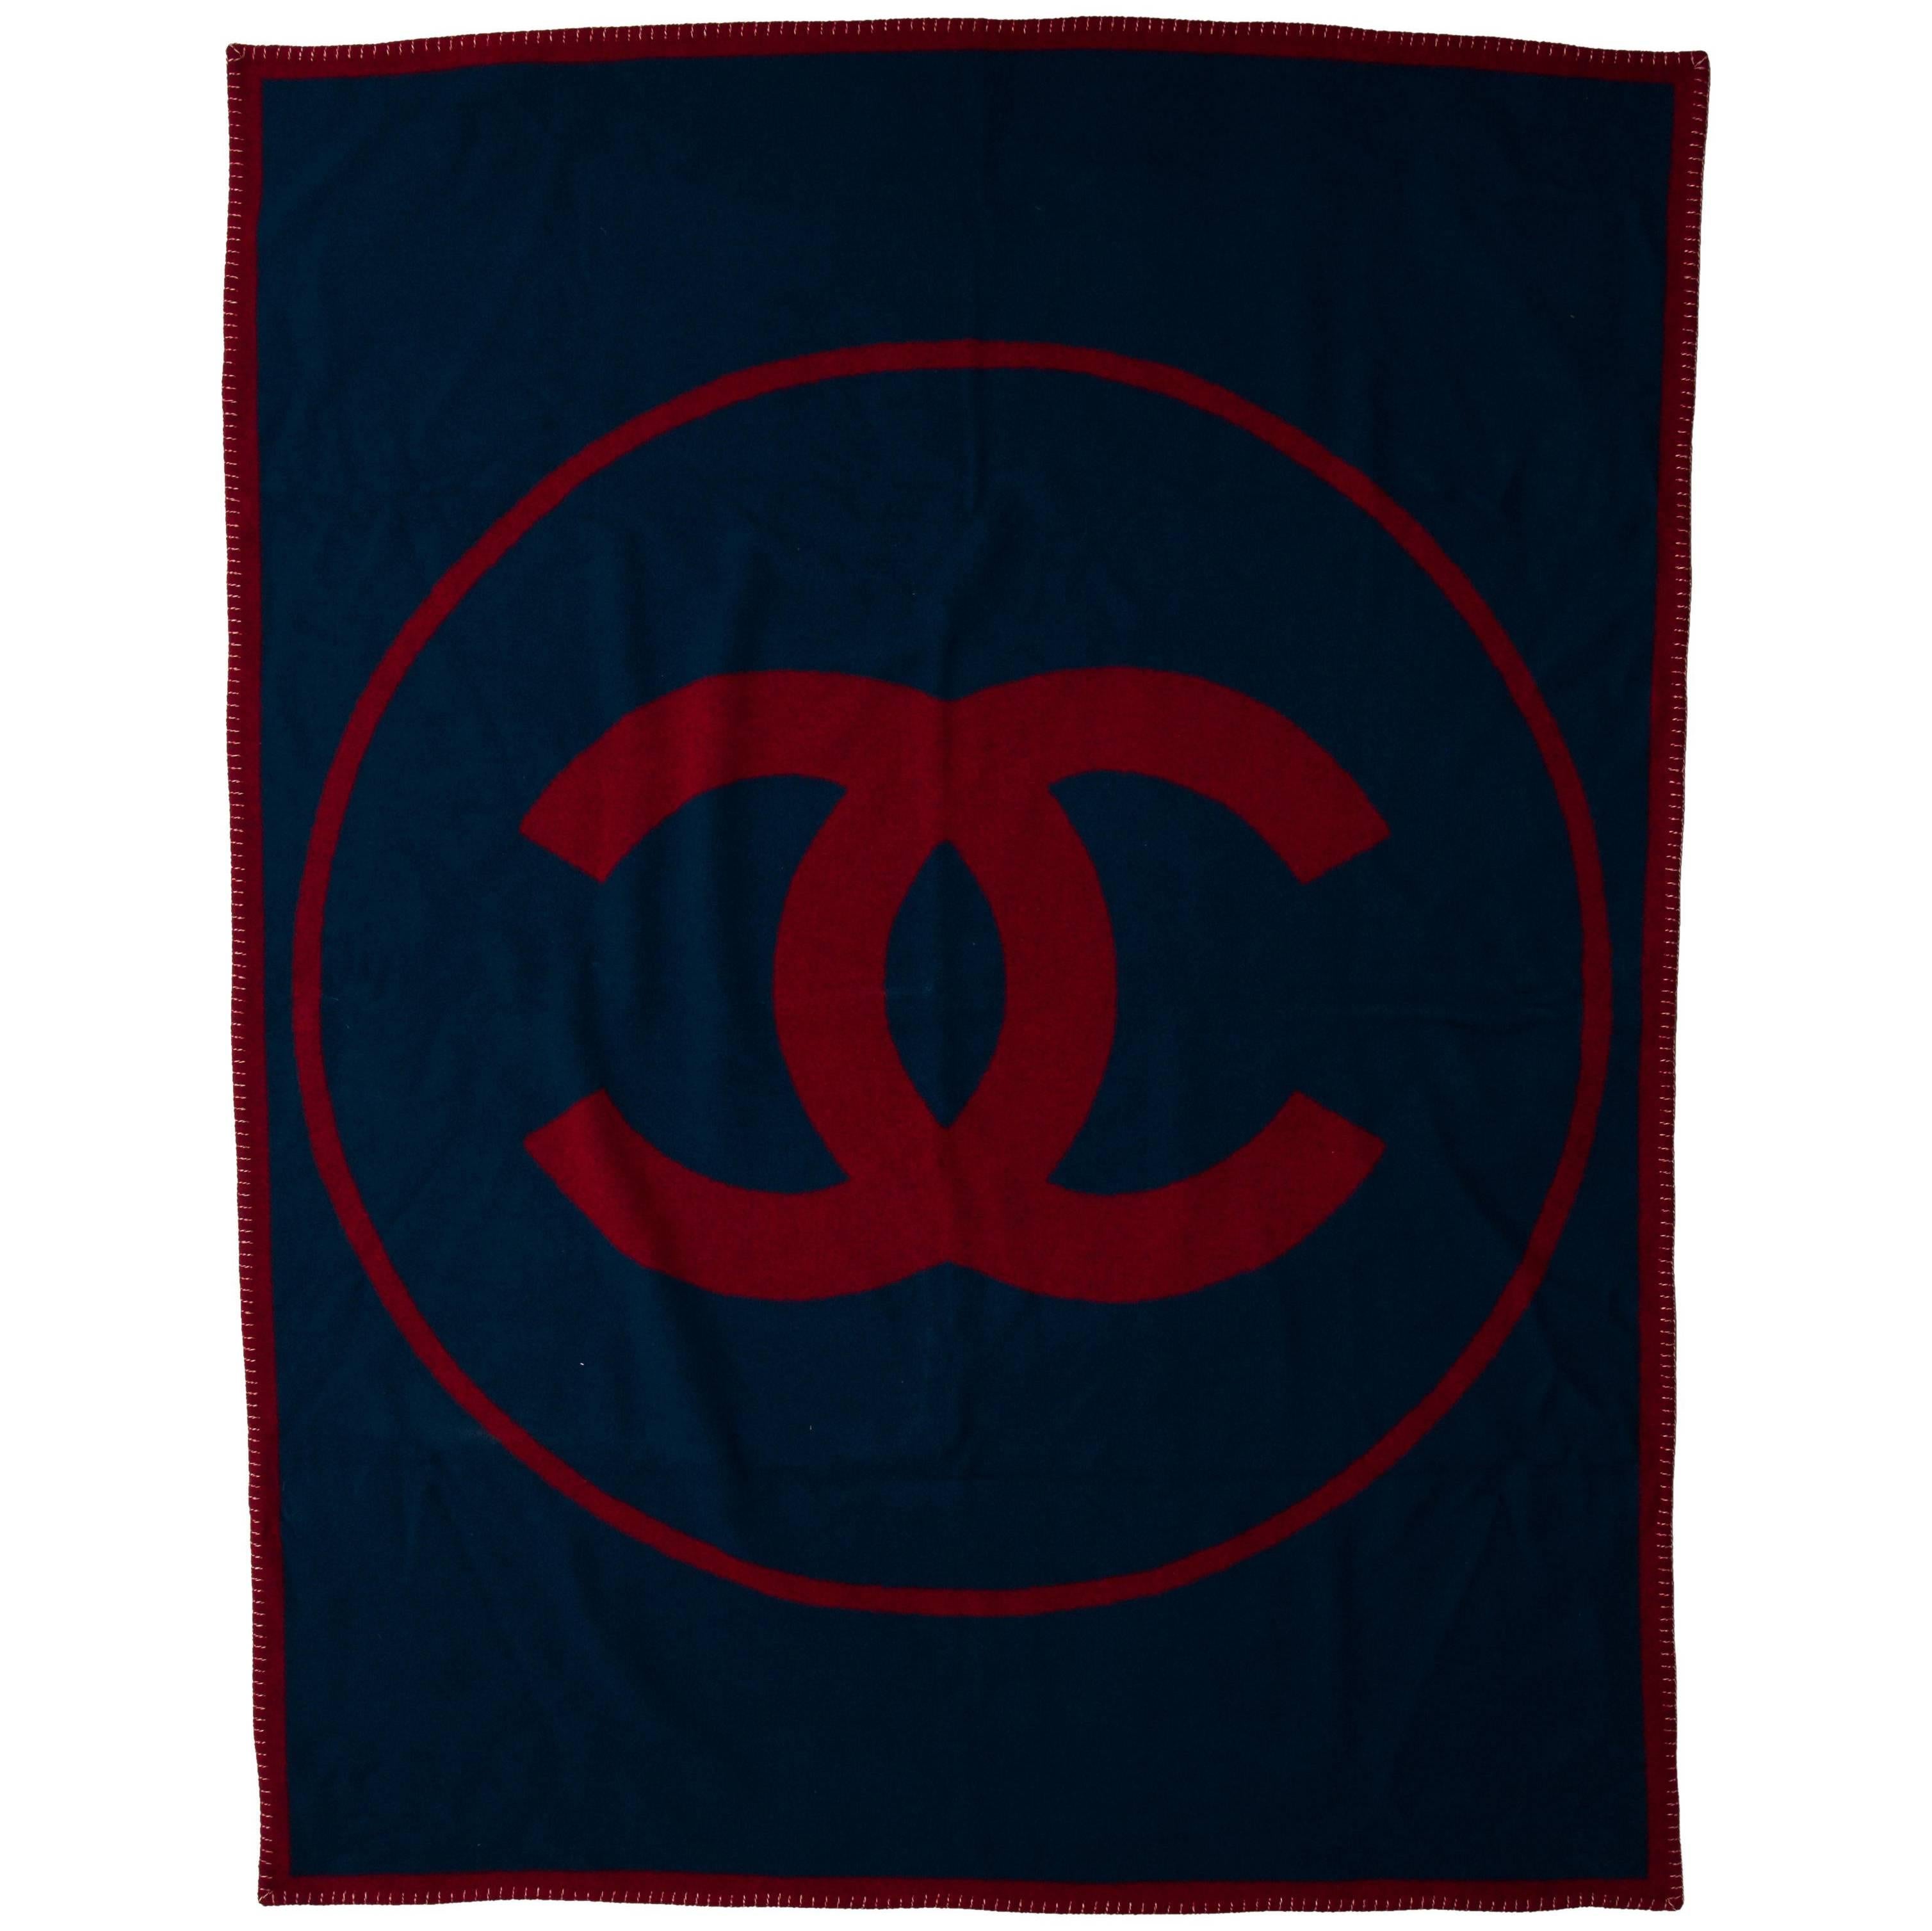 Chanel Red Blue Wool Cashmere Logo Men's Home Decor Table Couch Throw Blanket